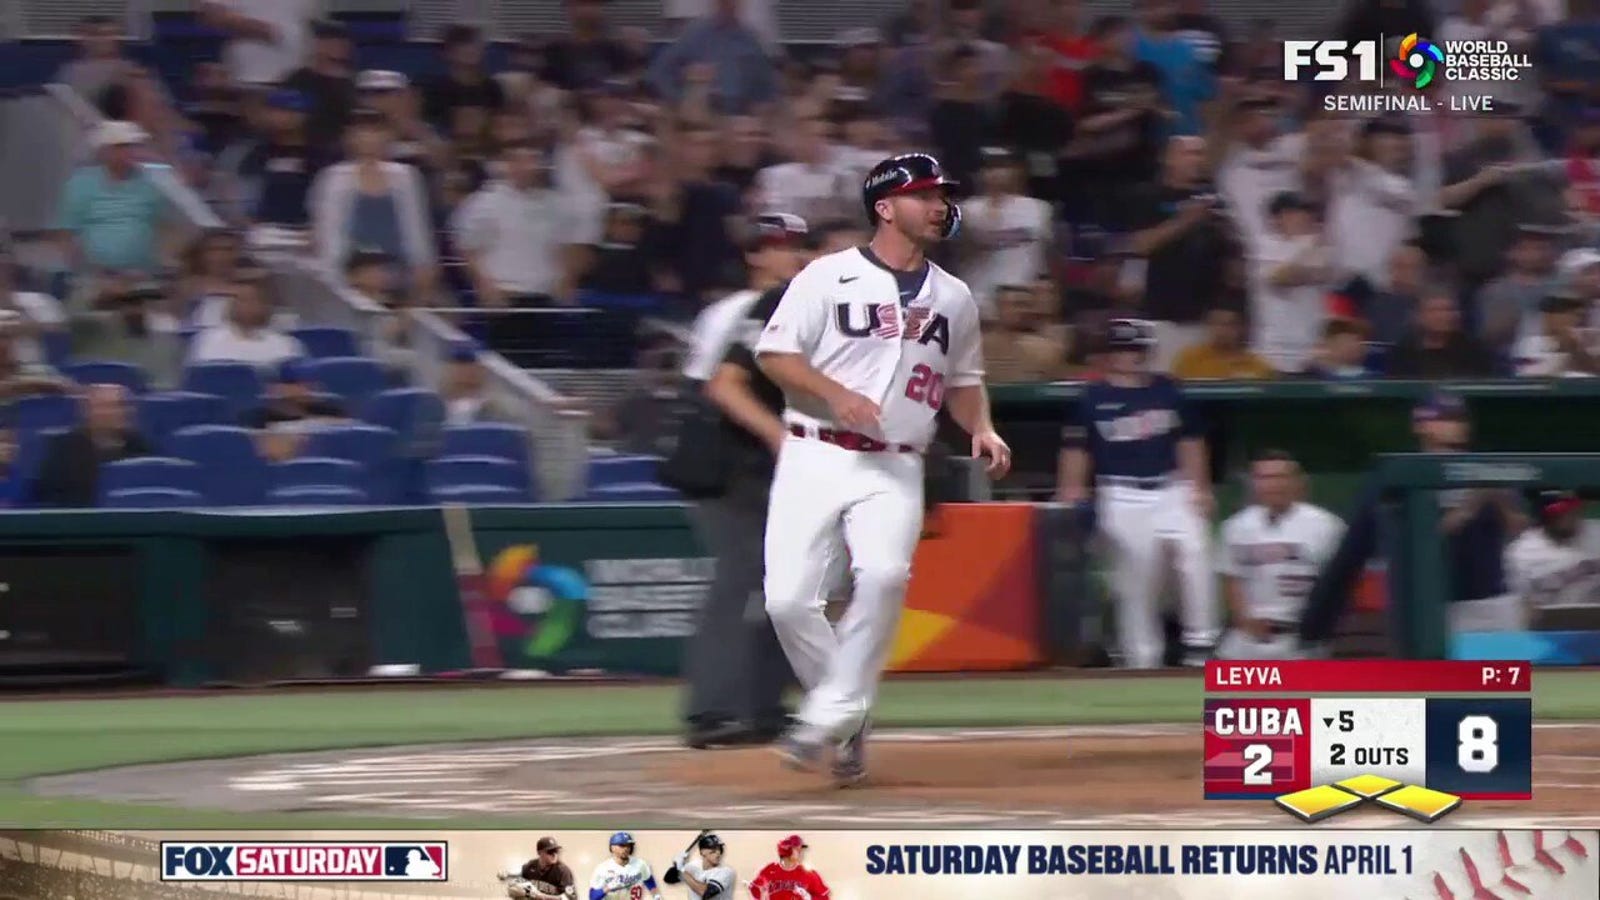 Paul Goldschmidt hits a two-run single, extending Team USA's lead over Cuba to 9-2